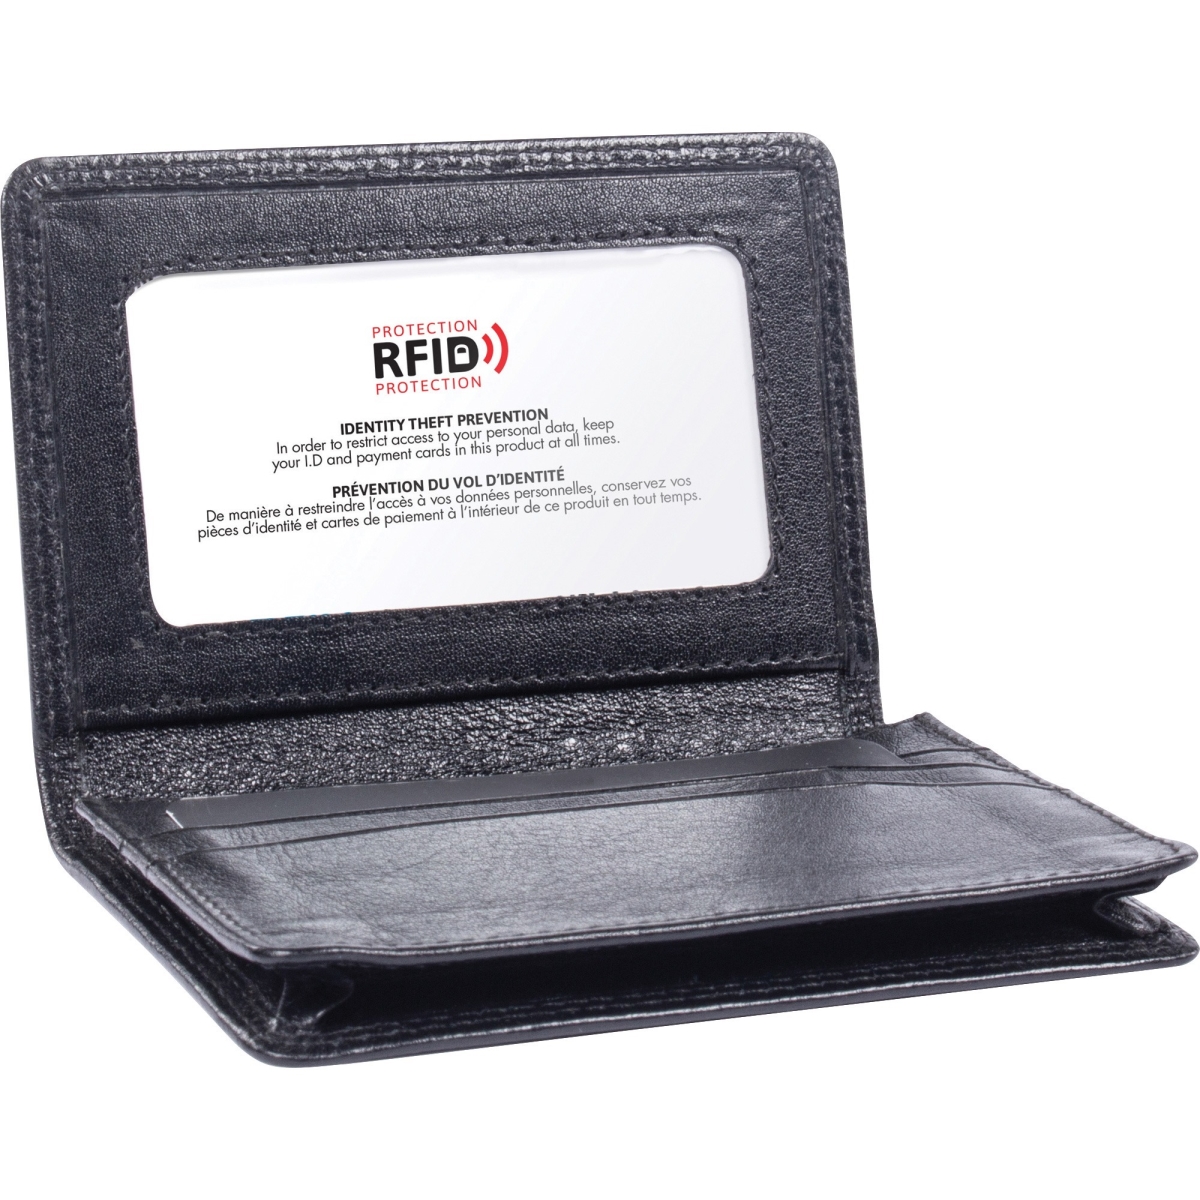 Swzbcc97349smbk Carrying Case Business Card, License - Black